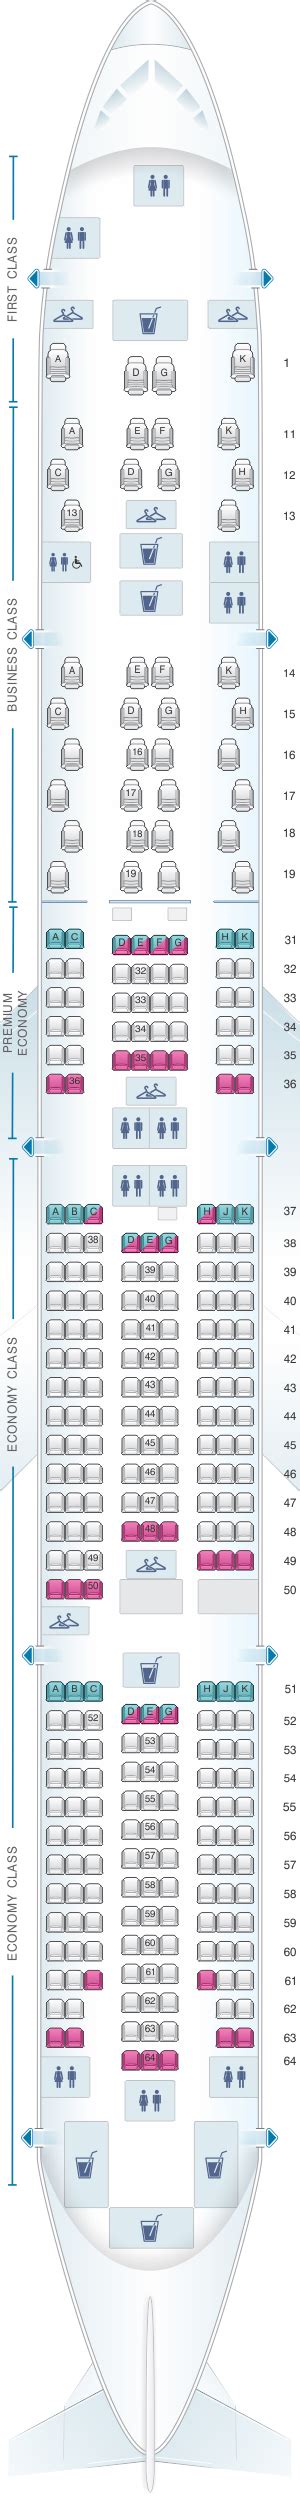 Seat Map China Southern Airlines Boeing B777 300er Airplane Seats Best